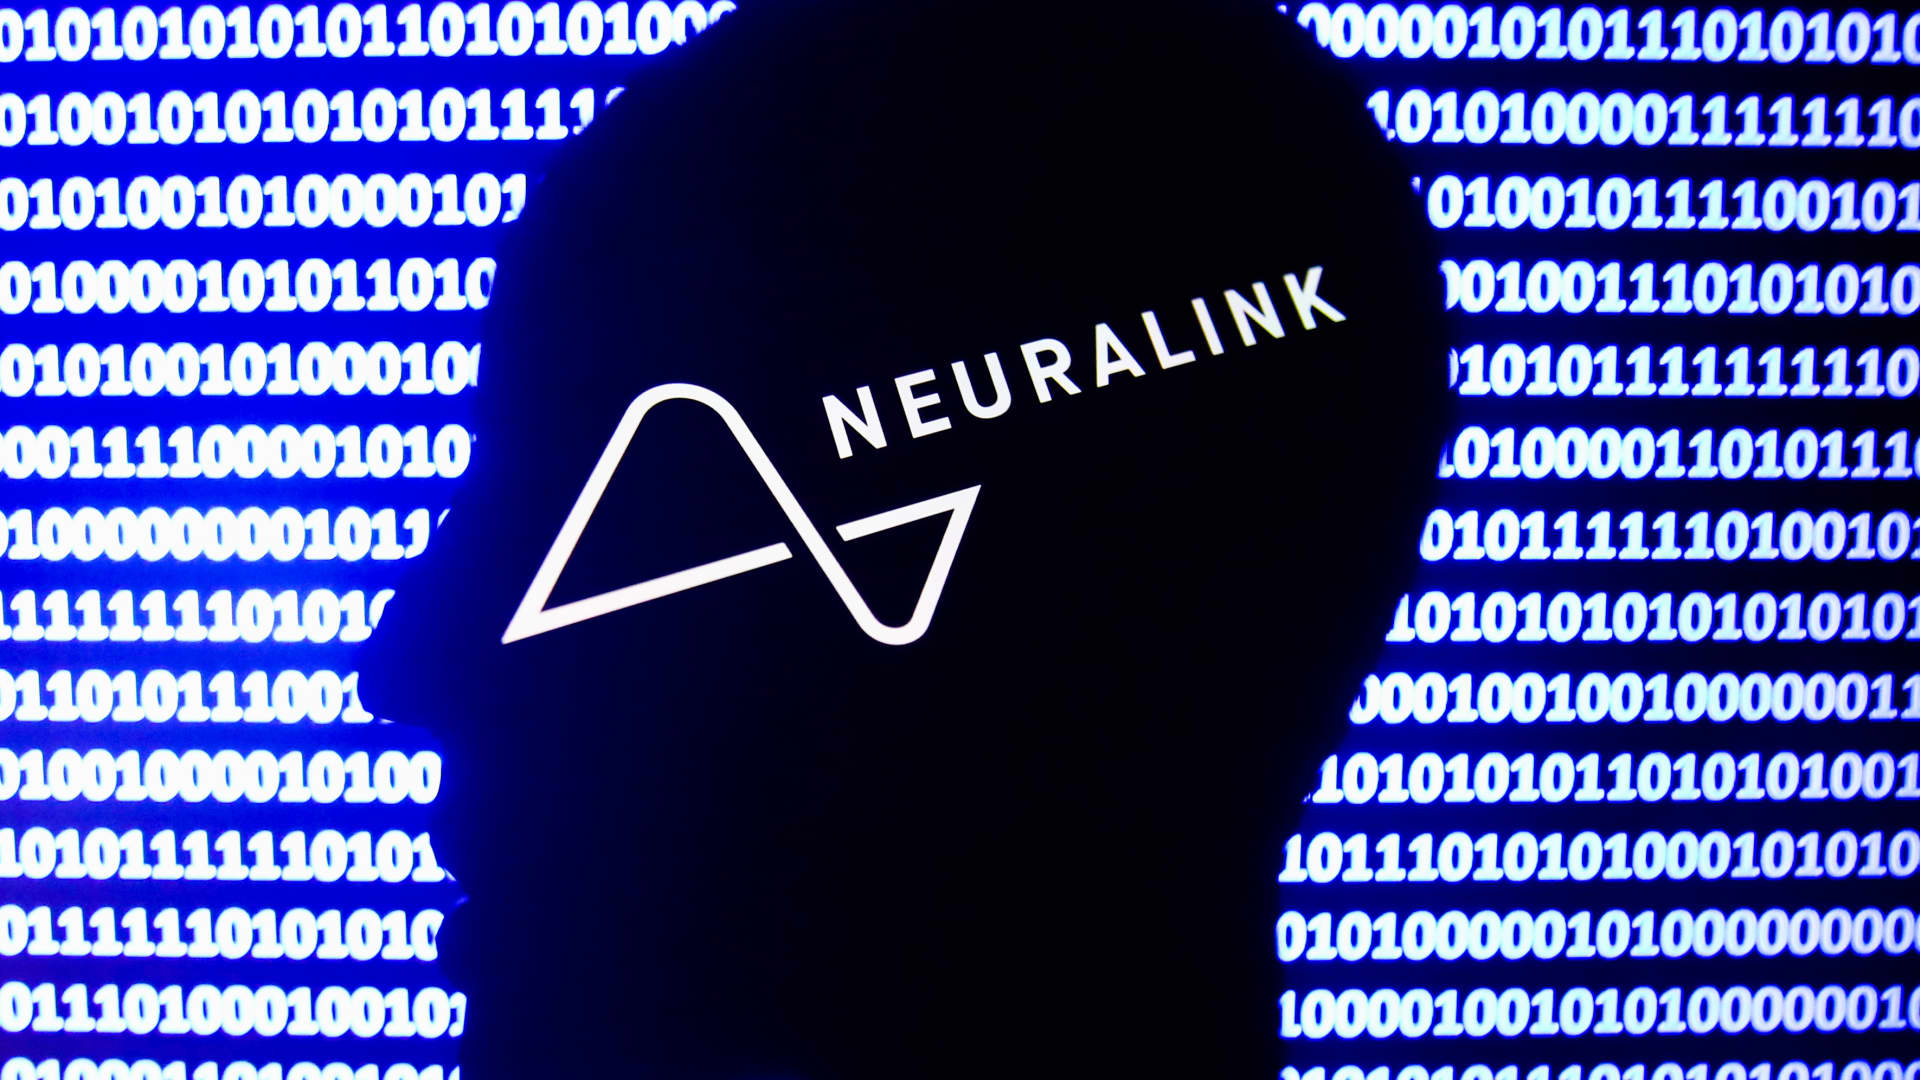 Elon Musk's brain implant company Neuralink announces FDA approval of in-human clinical study